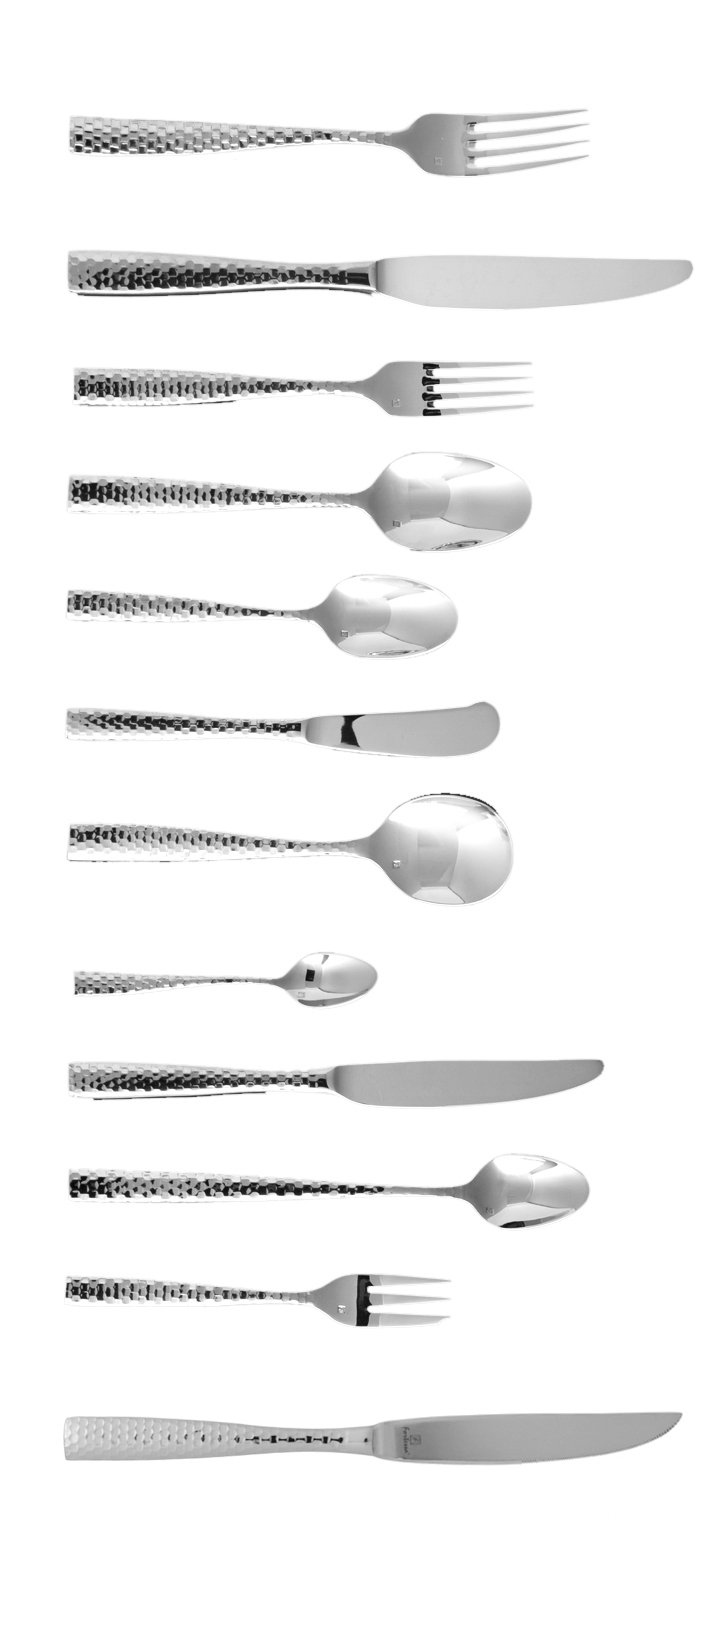 Fortessa Lucca Faceted 18/10 Stainless Steel Flatware Dessert/Oval Soup Spoon, Set of 12